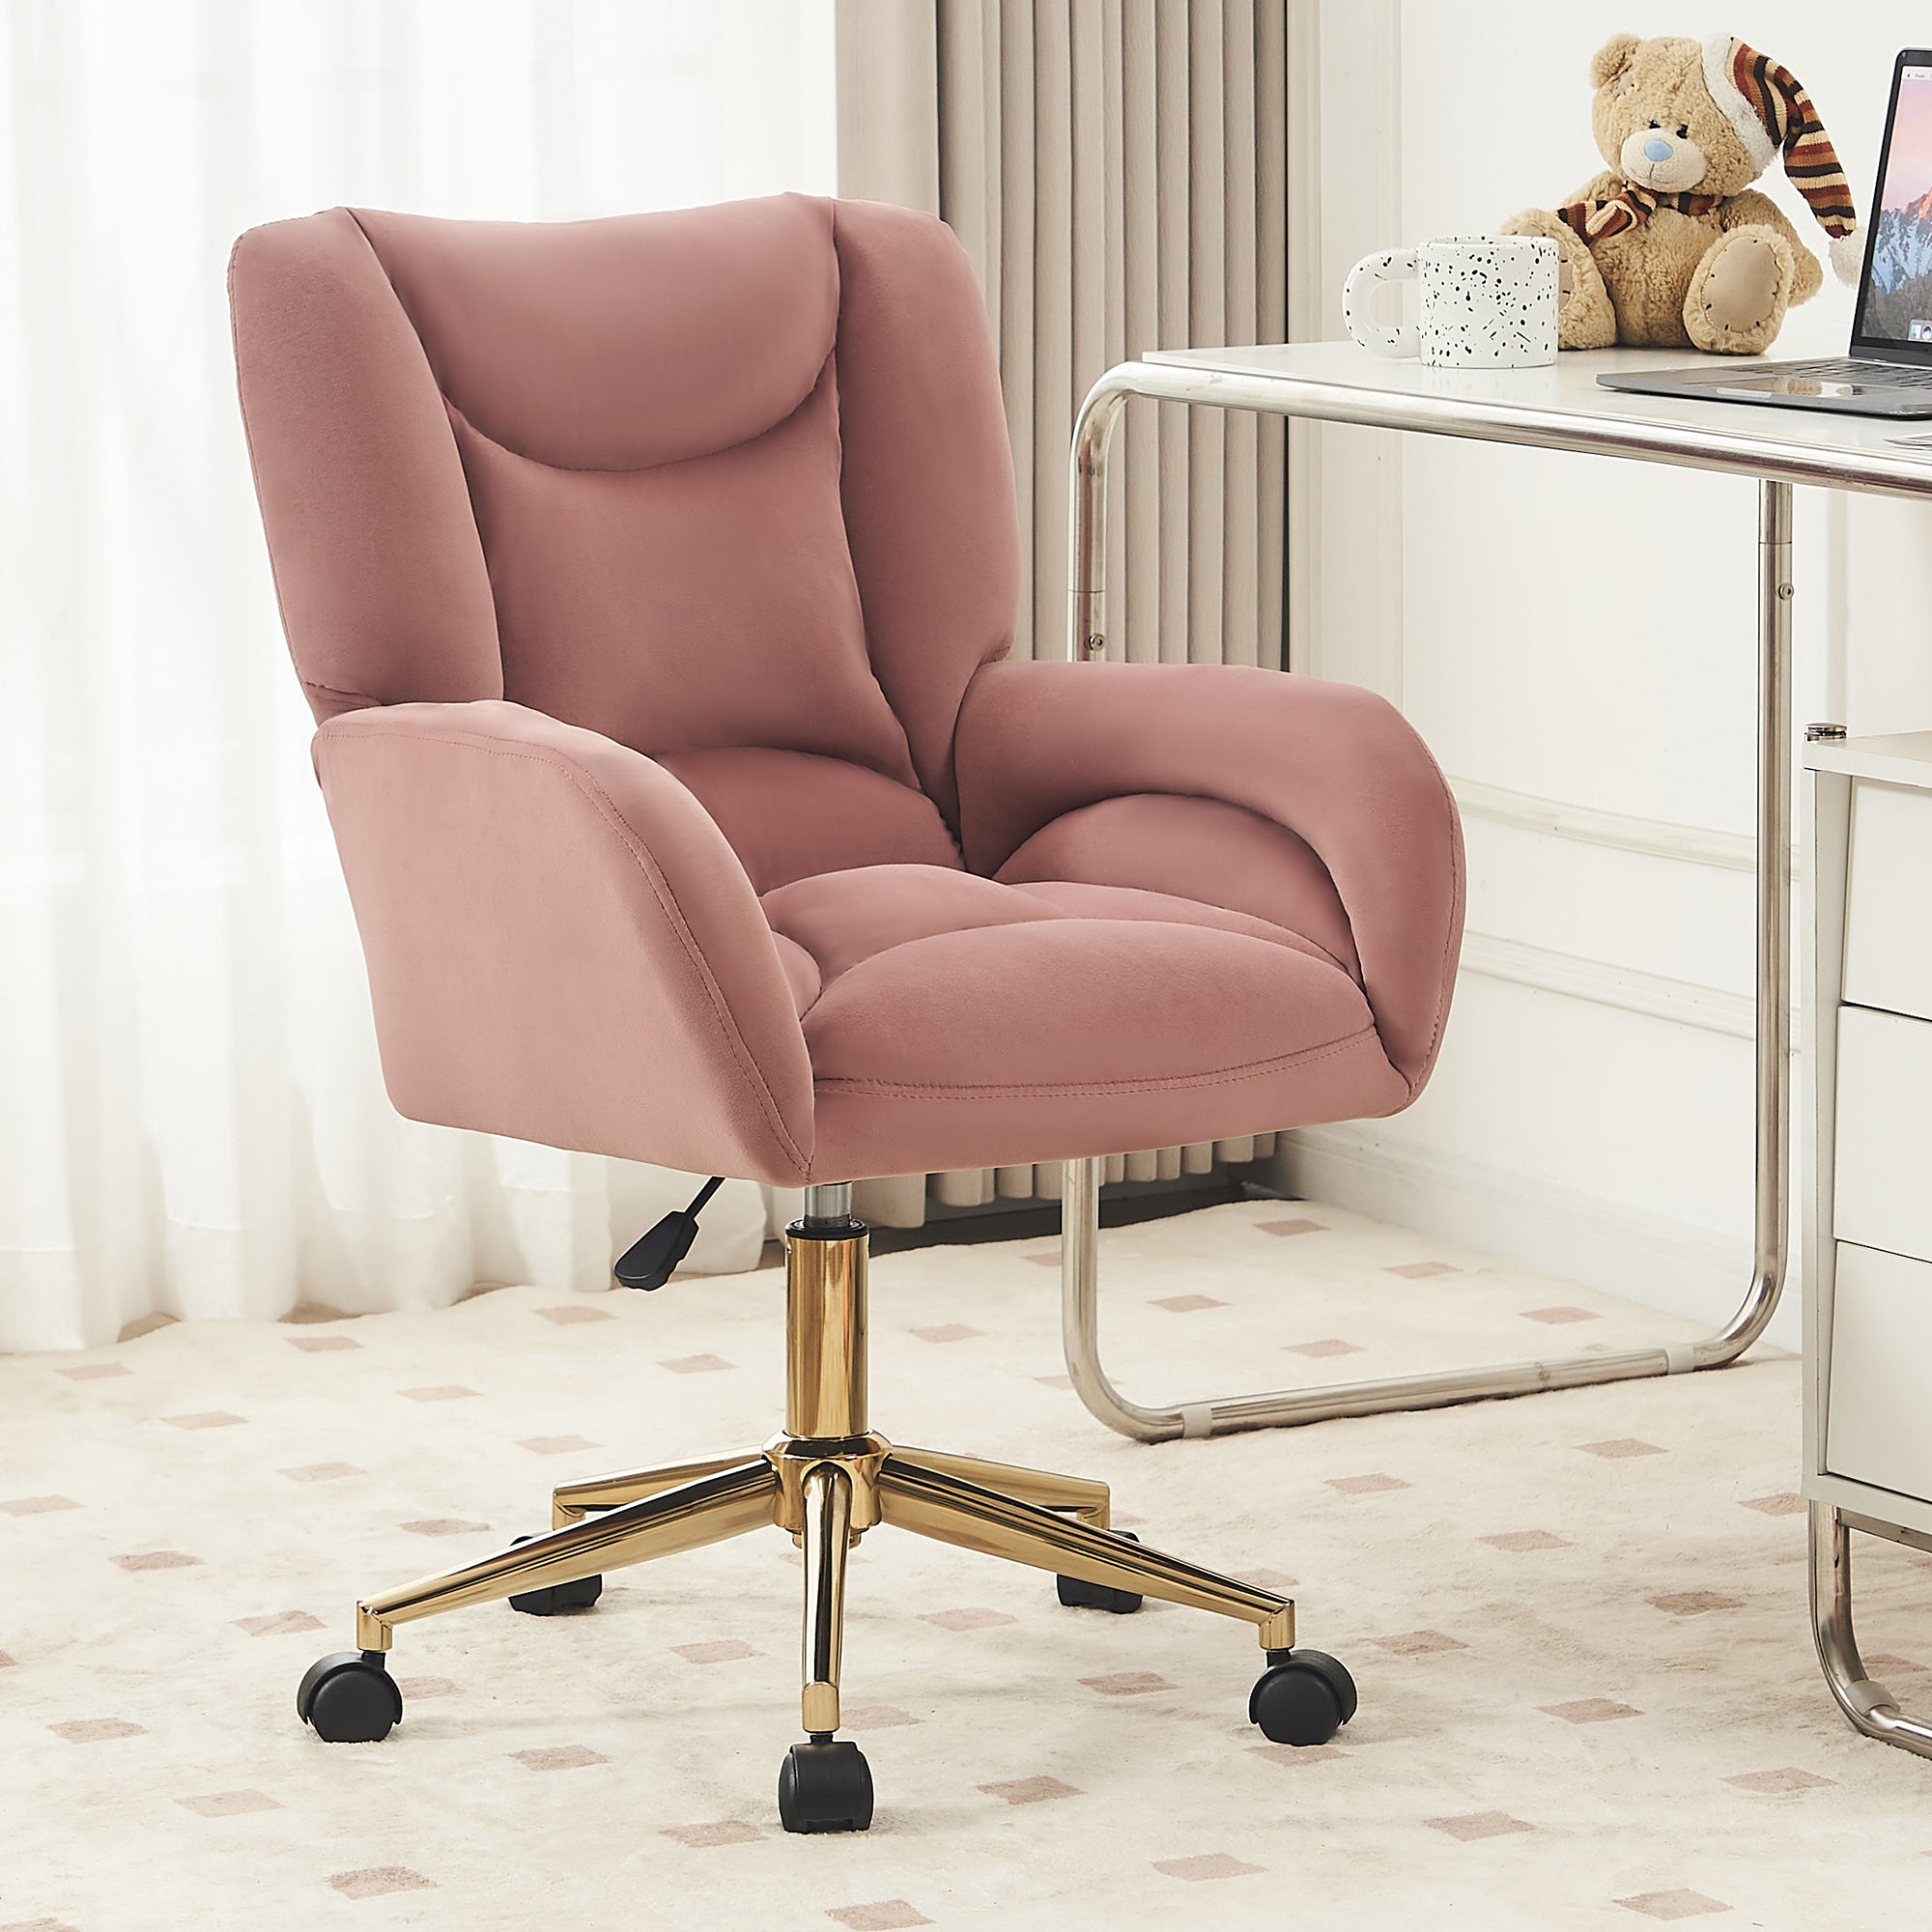 005-Velvet Fabric 360 Swivel Home Office Chair With Gold Metal Base And Universal Wheels,Pink